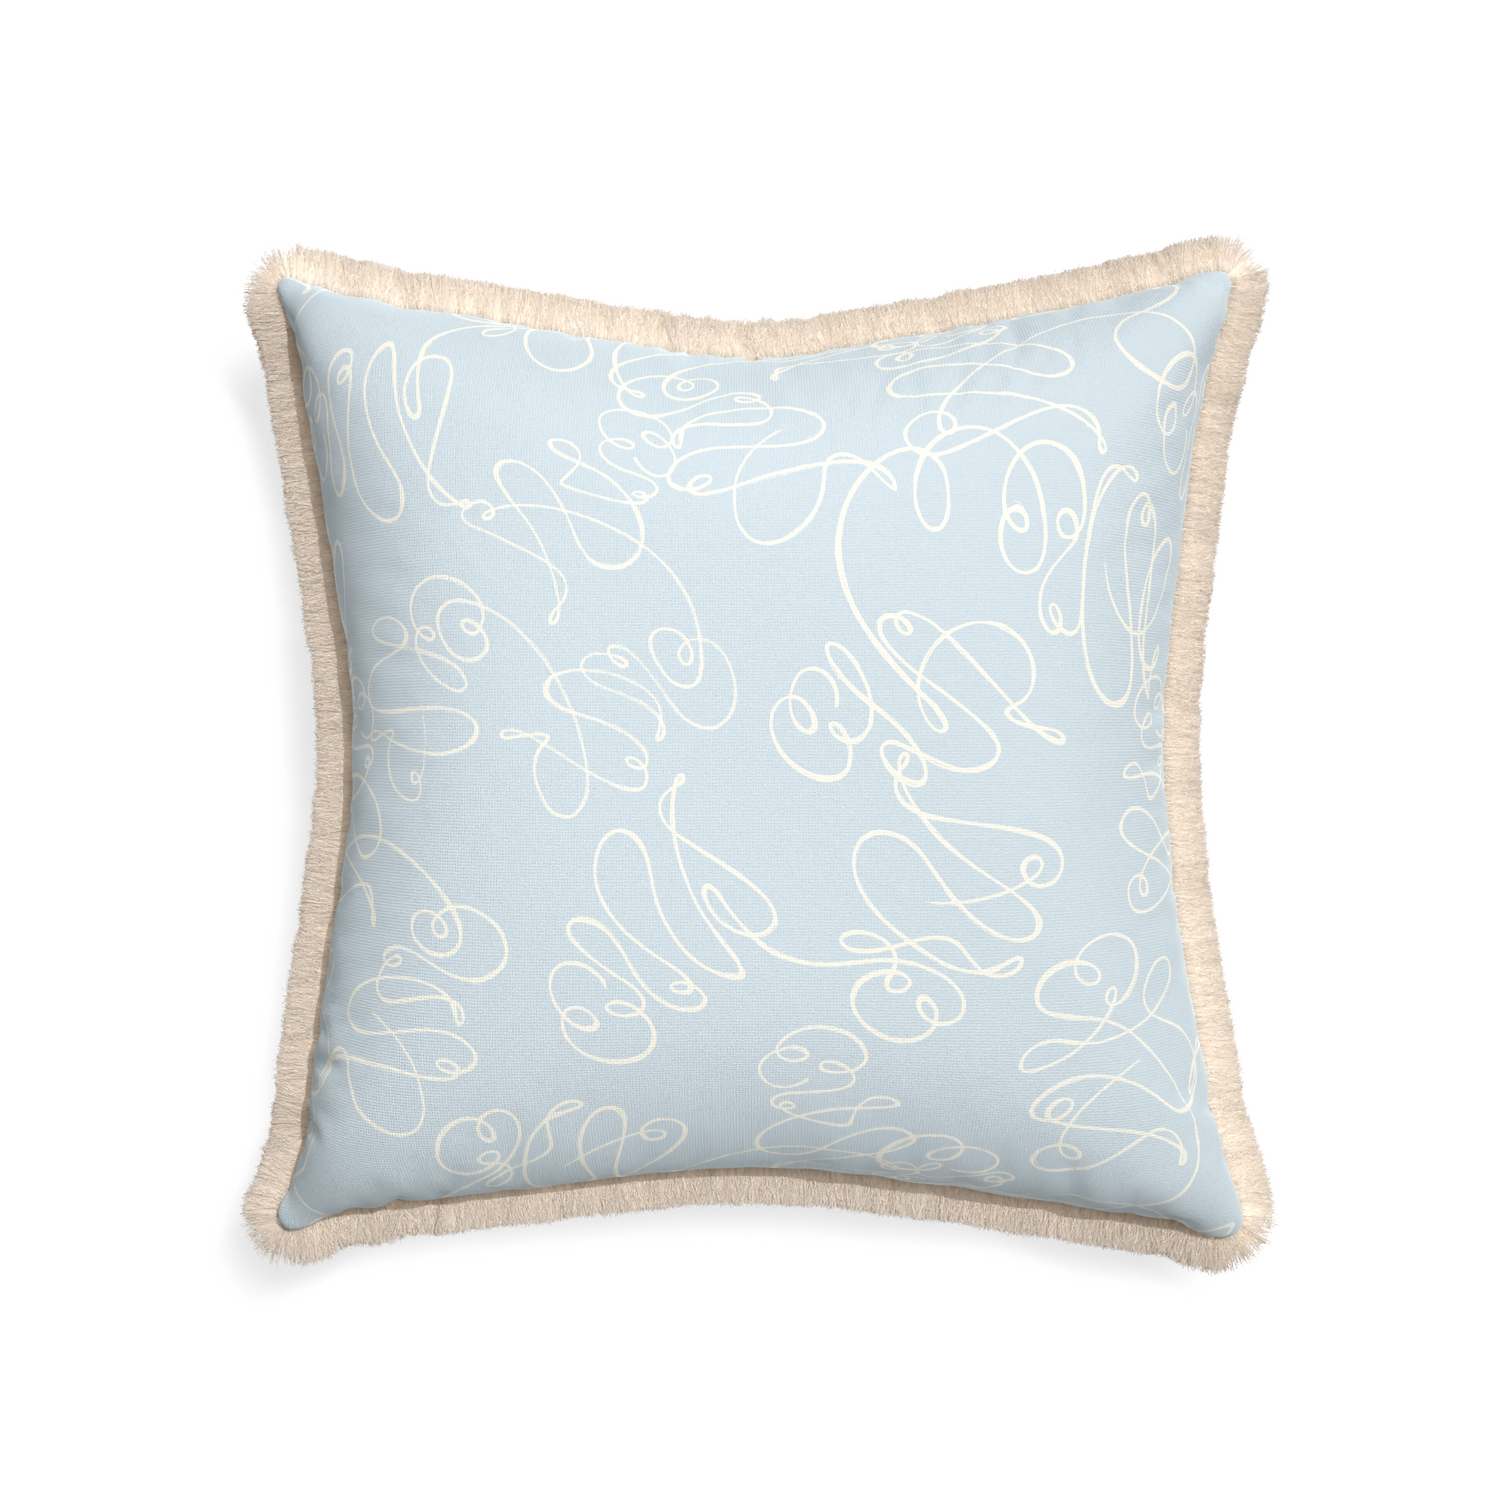 22-square mirabella custom powder blue abstractpillow with cream fringe on white background